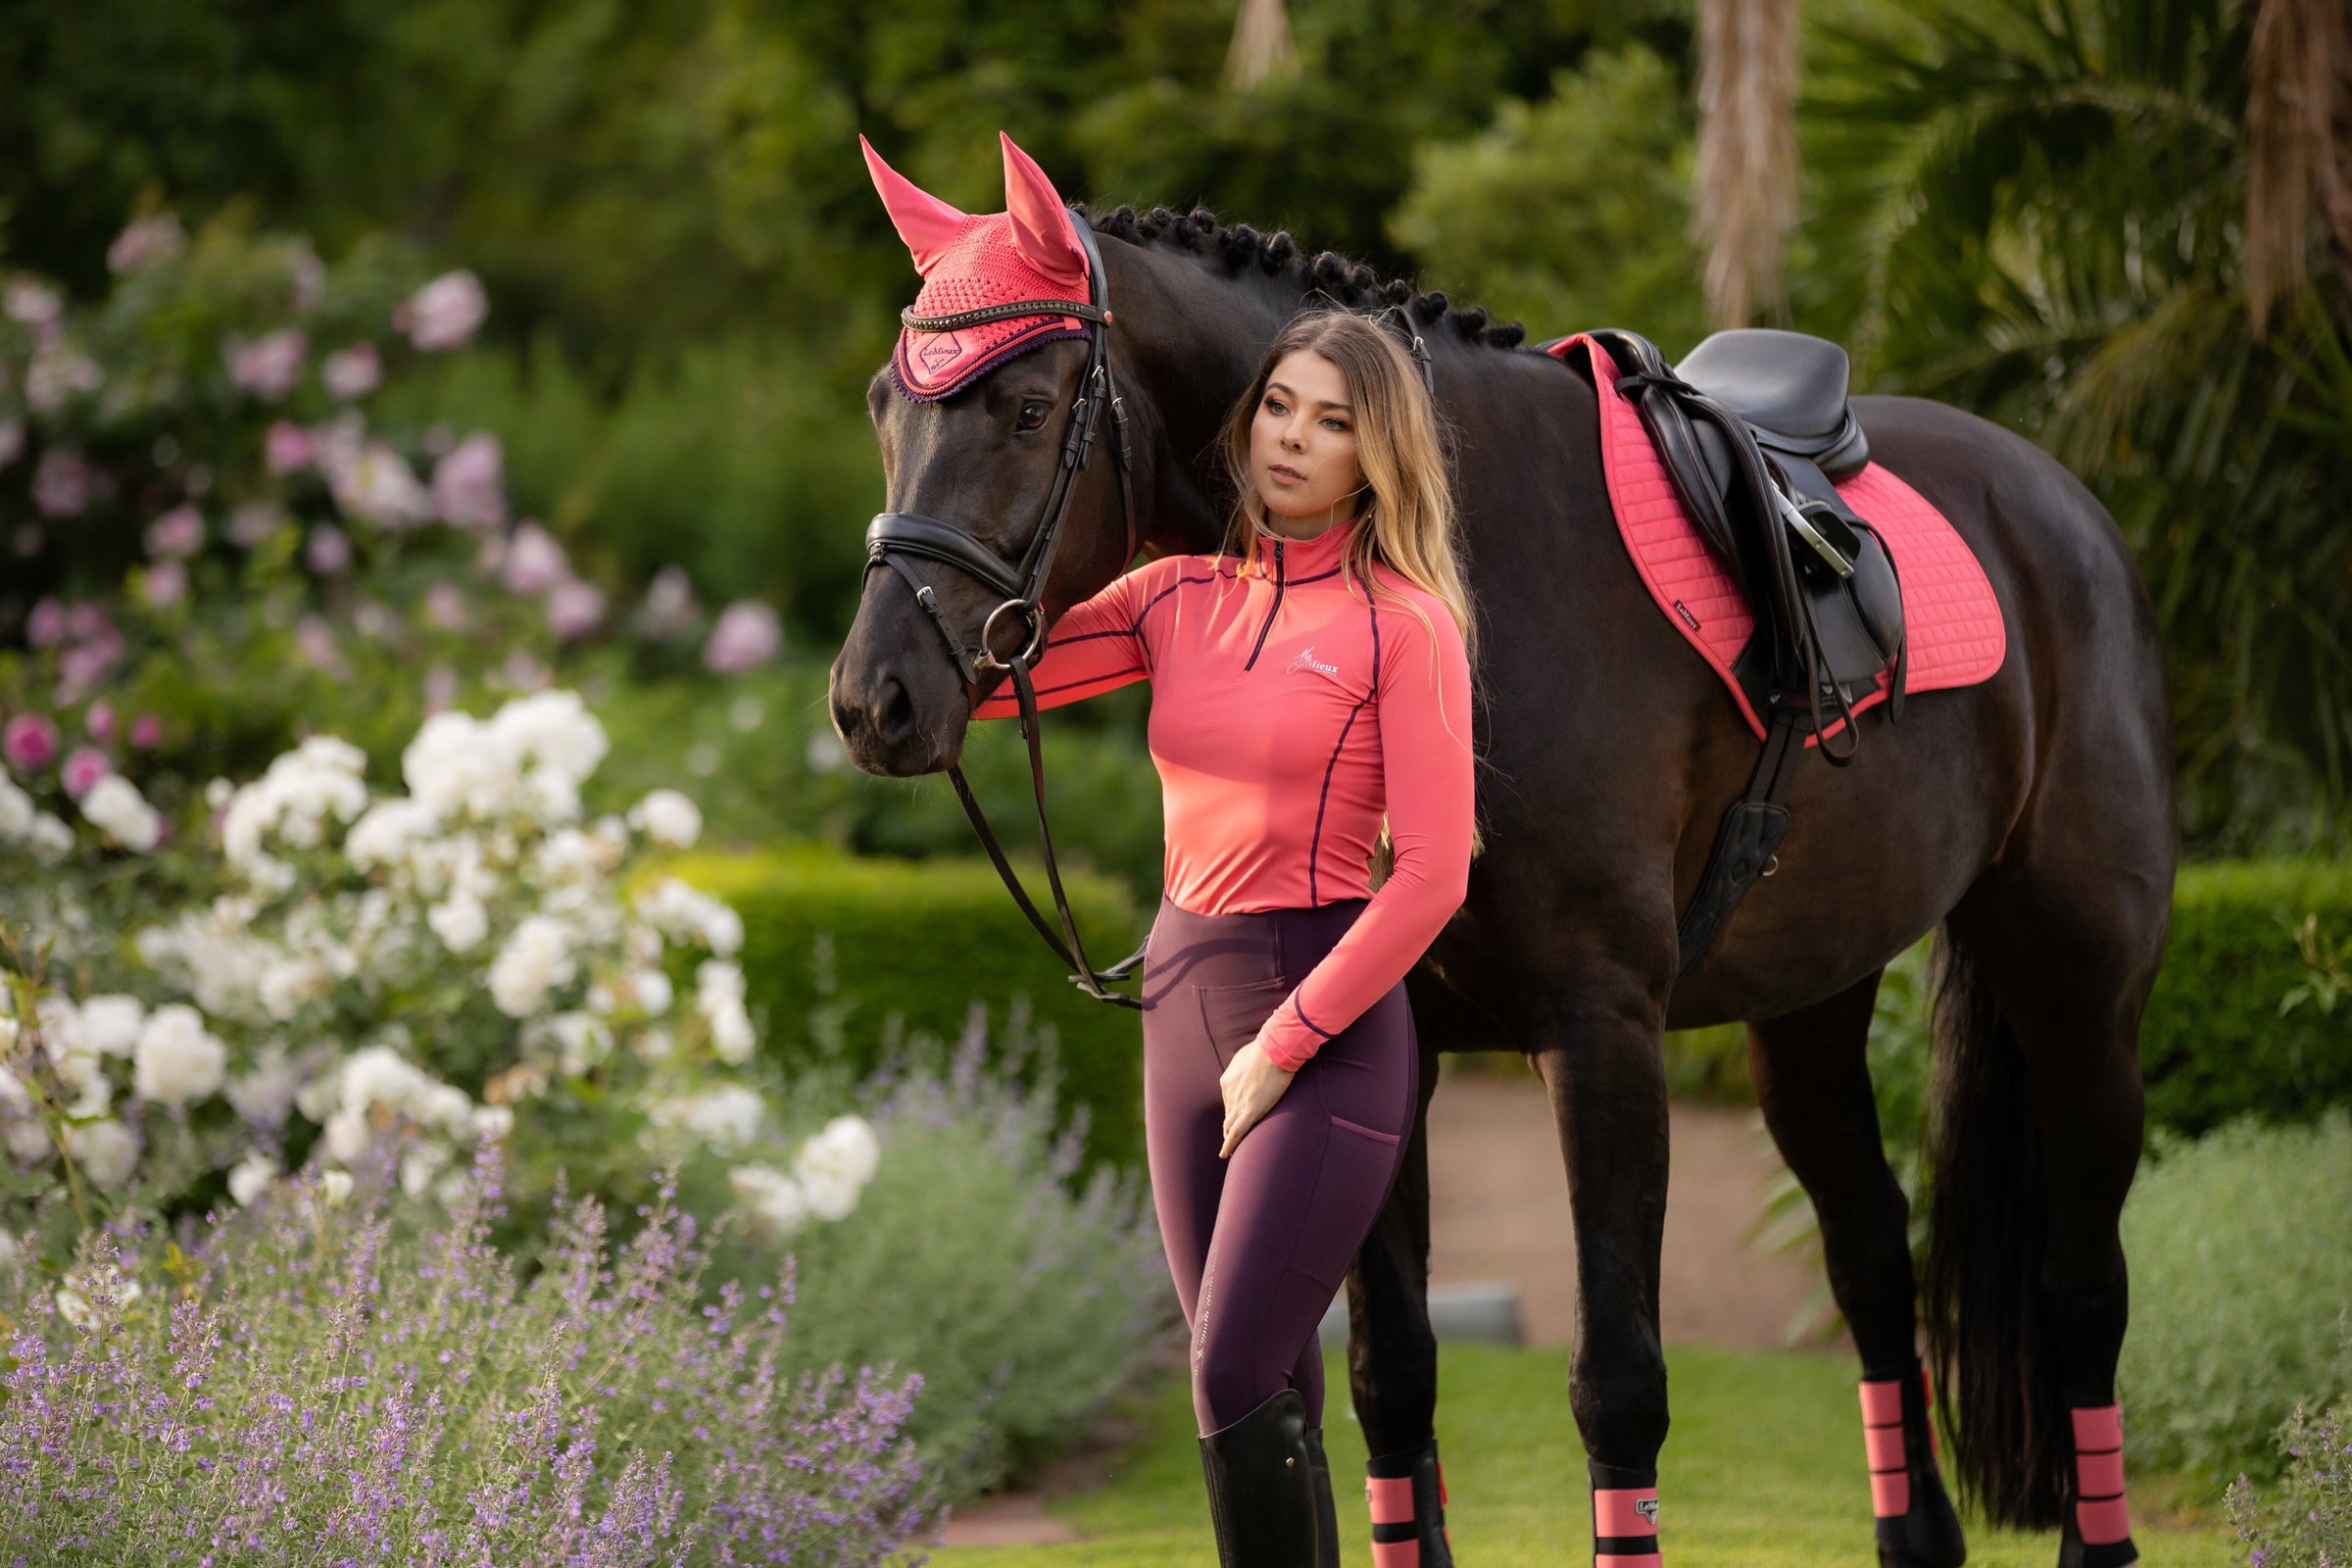 Horse & Rider wearing the New LeMieux Collection